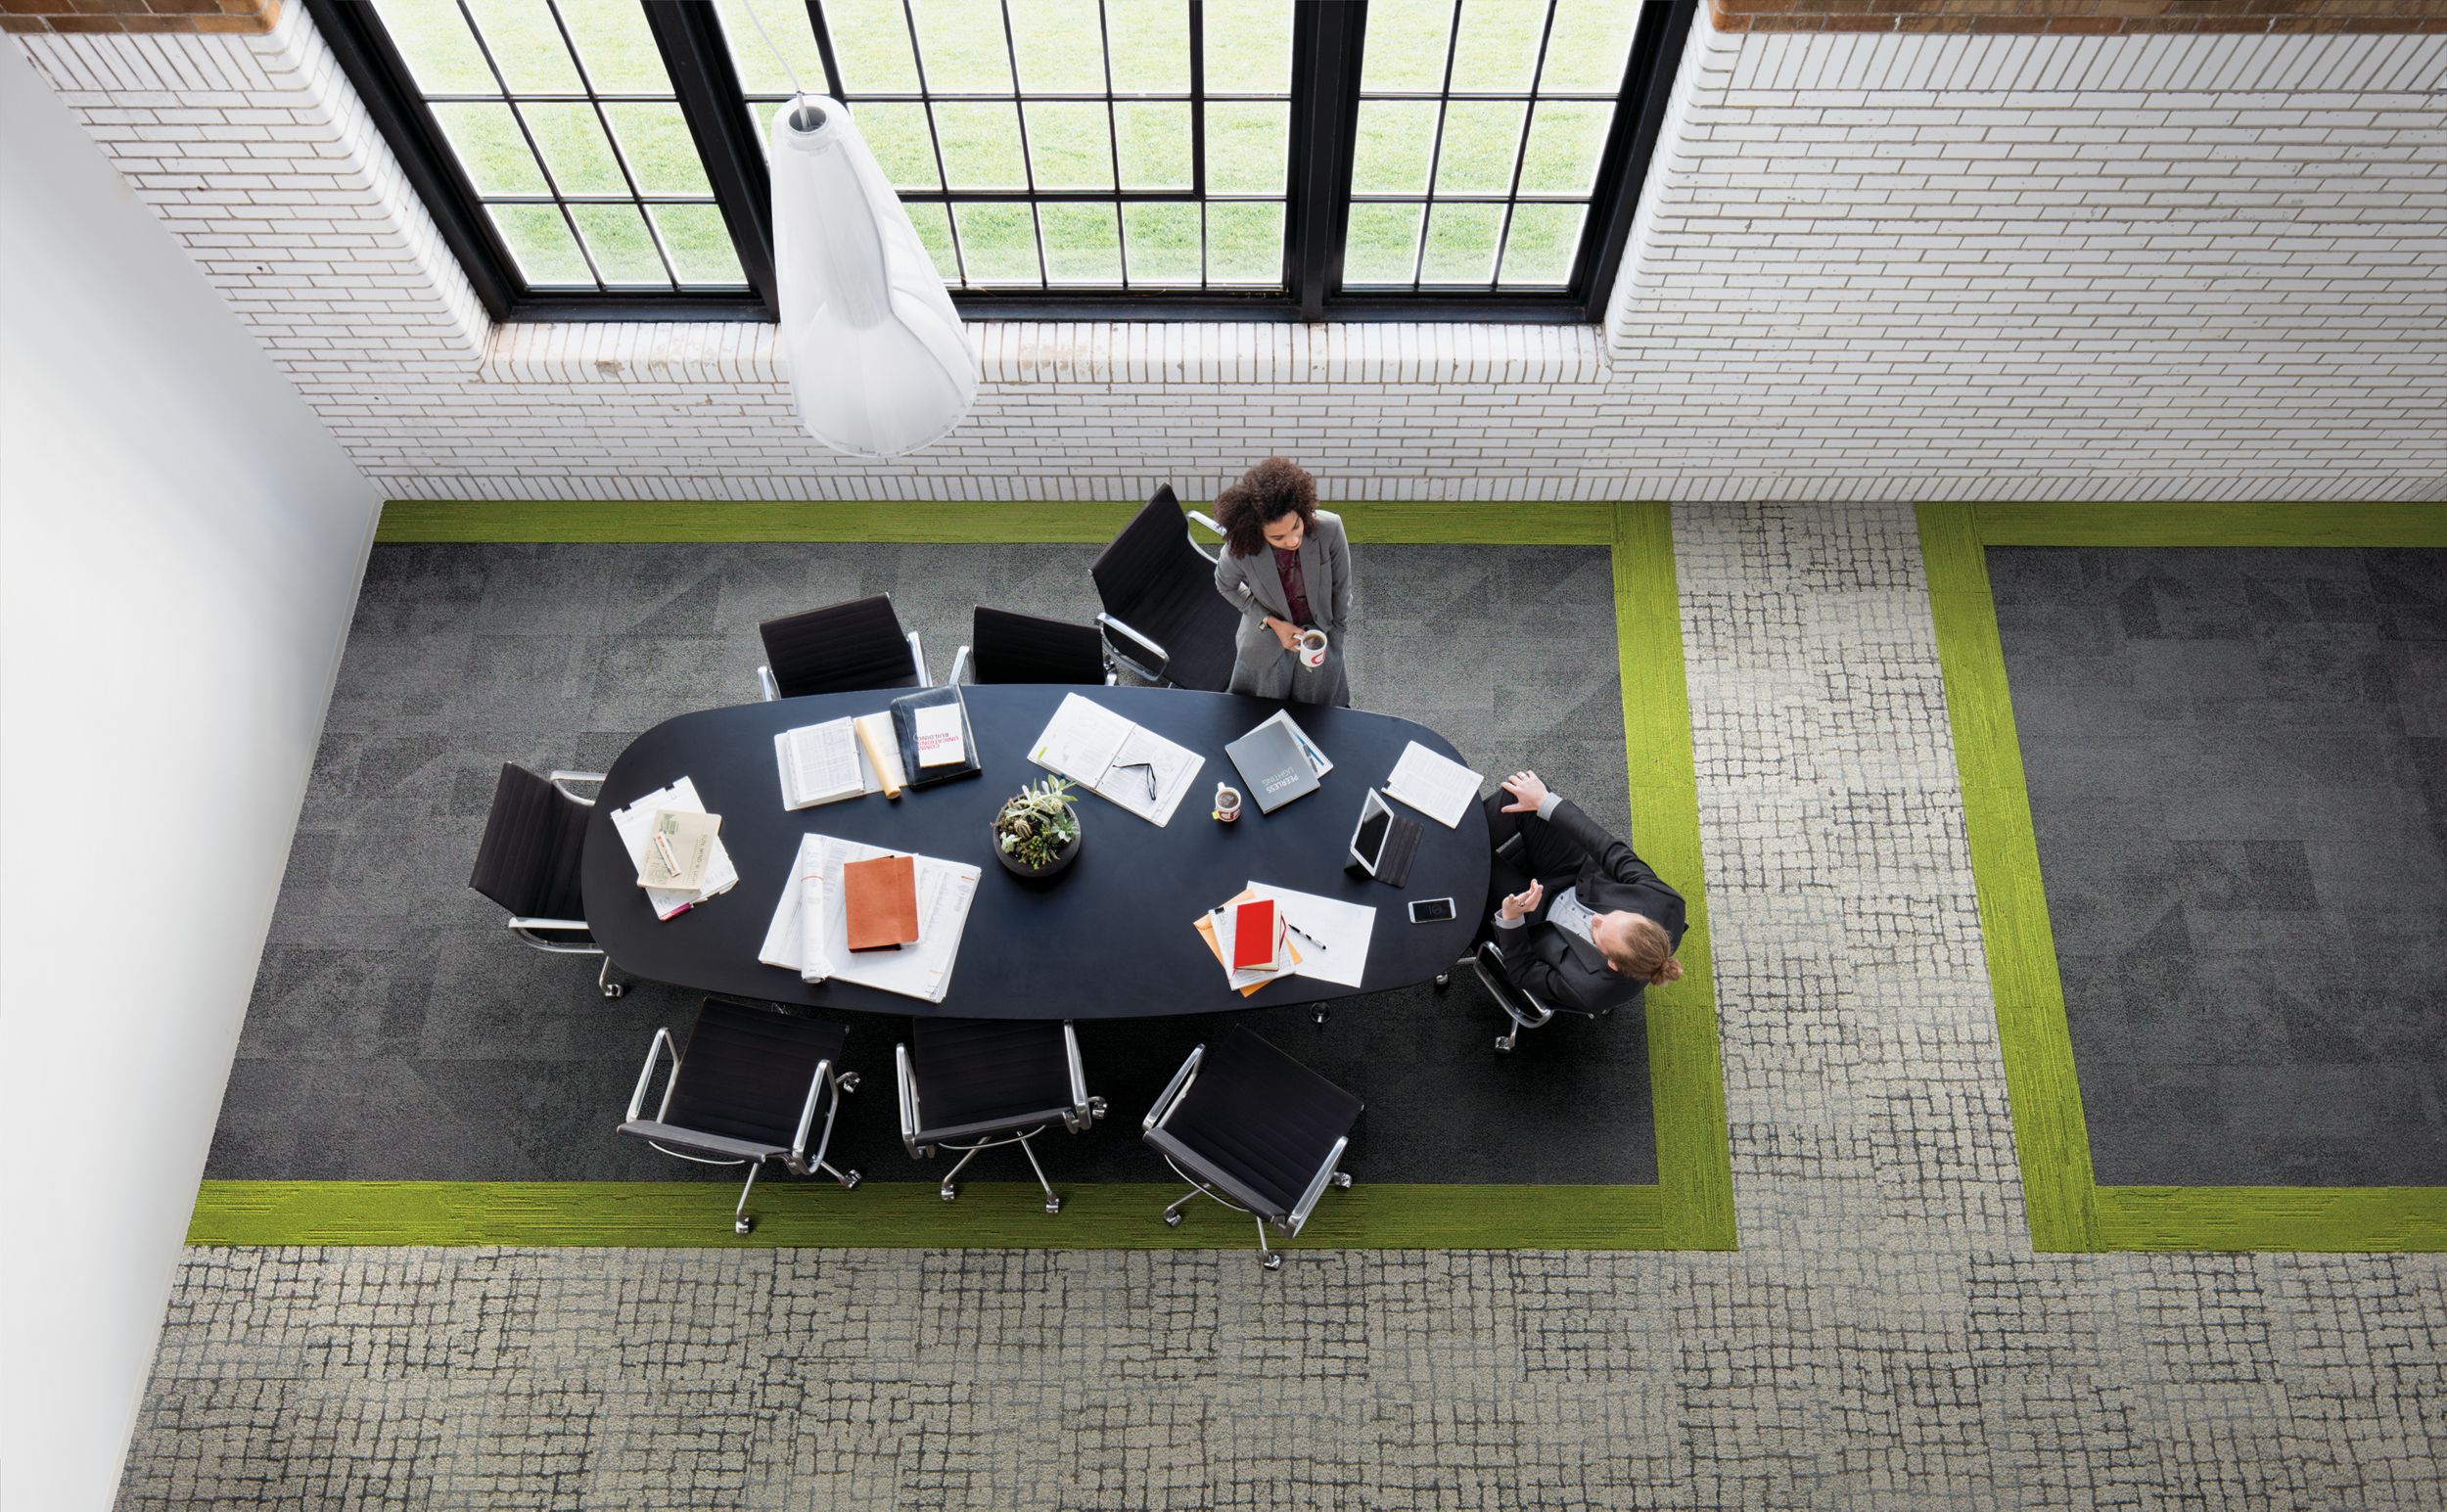 Interface Paver and Sett in Stone carpet tile with UR501 plank carpet tile in overhead view of meeting area with man and women conversating número de imagen 3